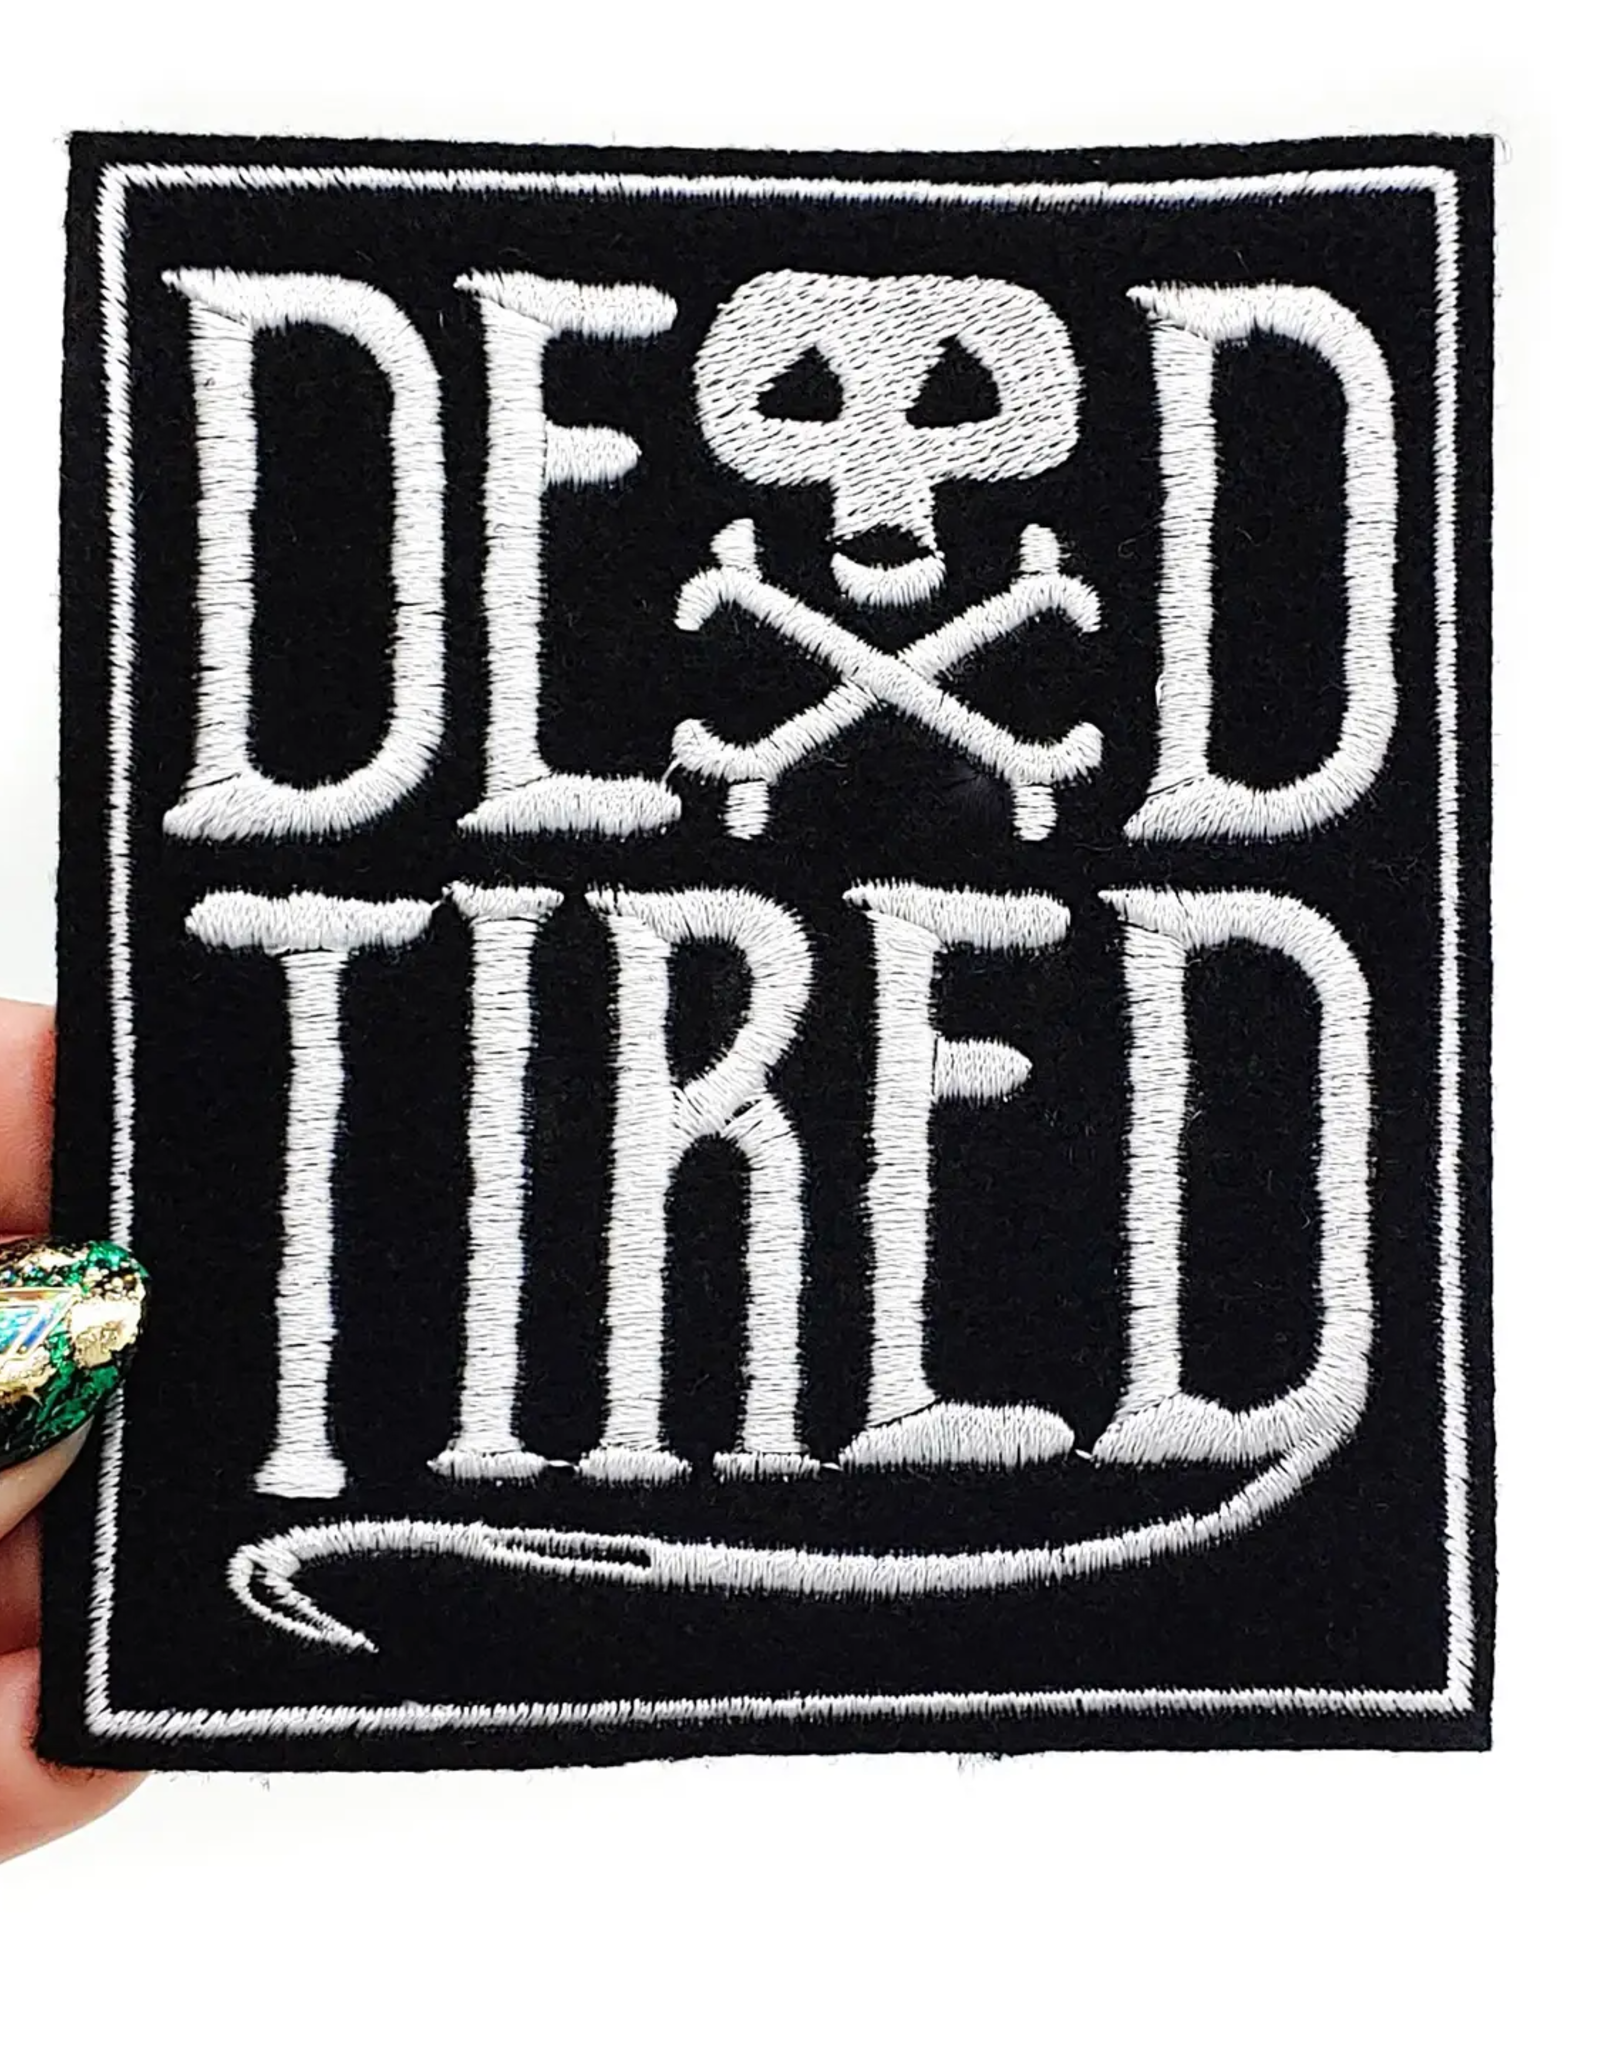 Dead Tired Embroidered Patch with Iron On Adhesive